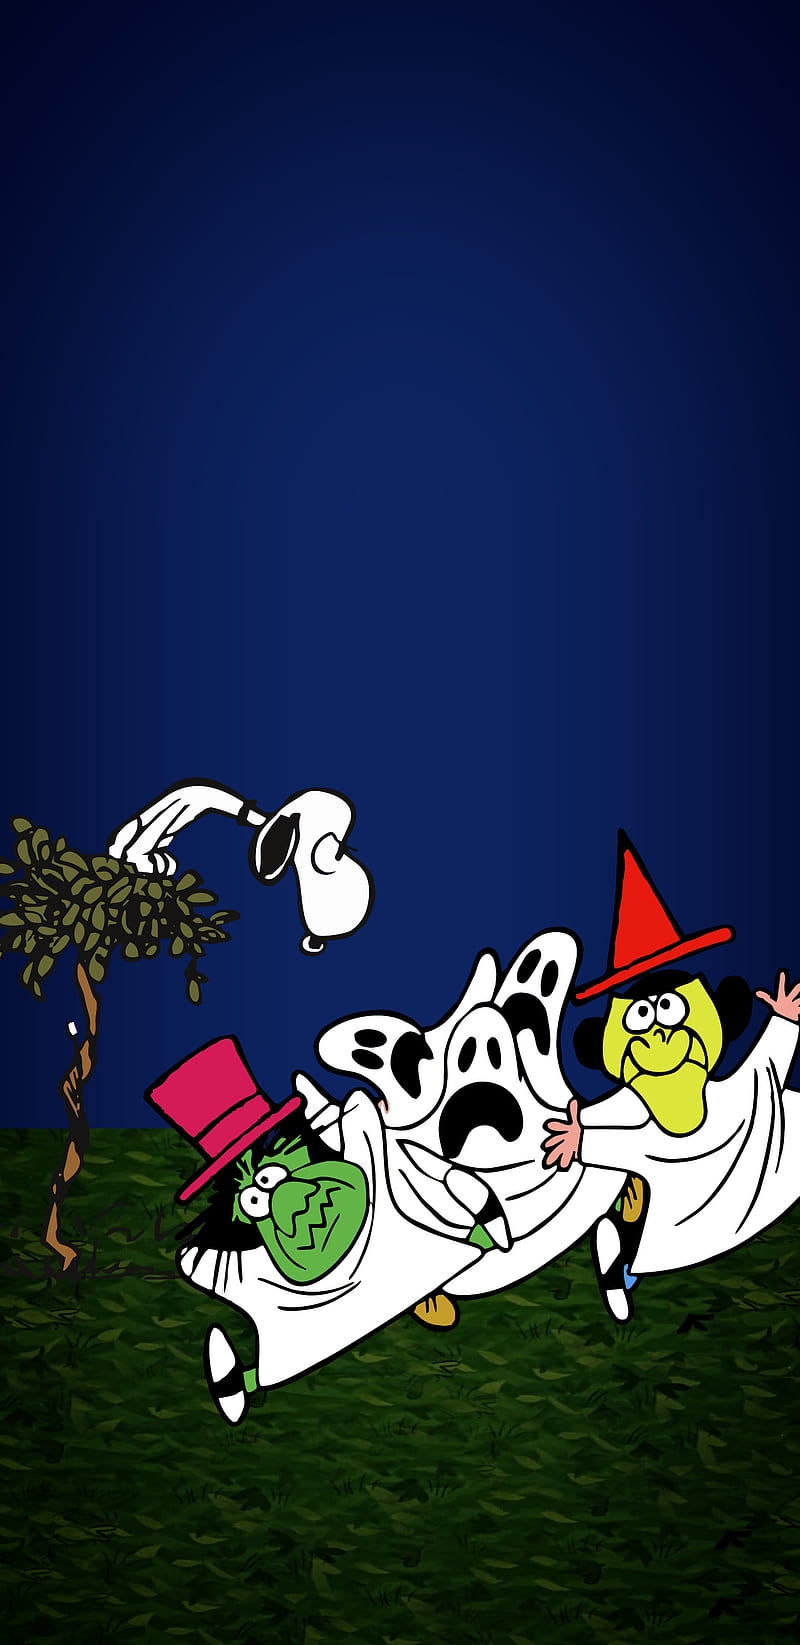 Snoopy Halloween charlie brown costume lucy peanuts scared vulture  wraitude HD phone wallpaper  Peakpx